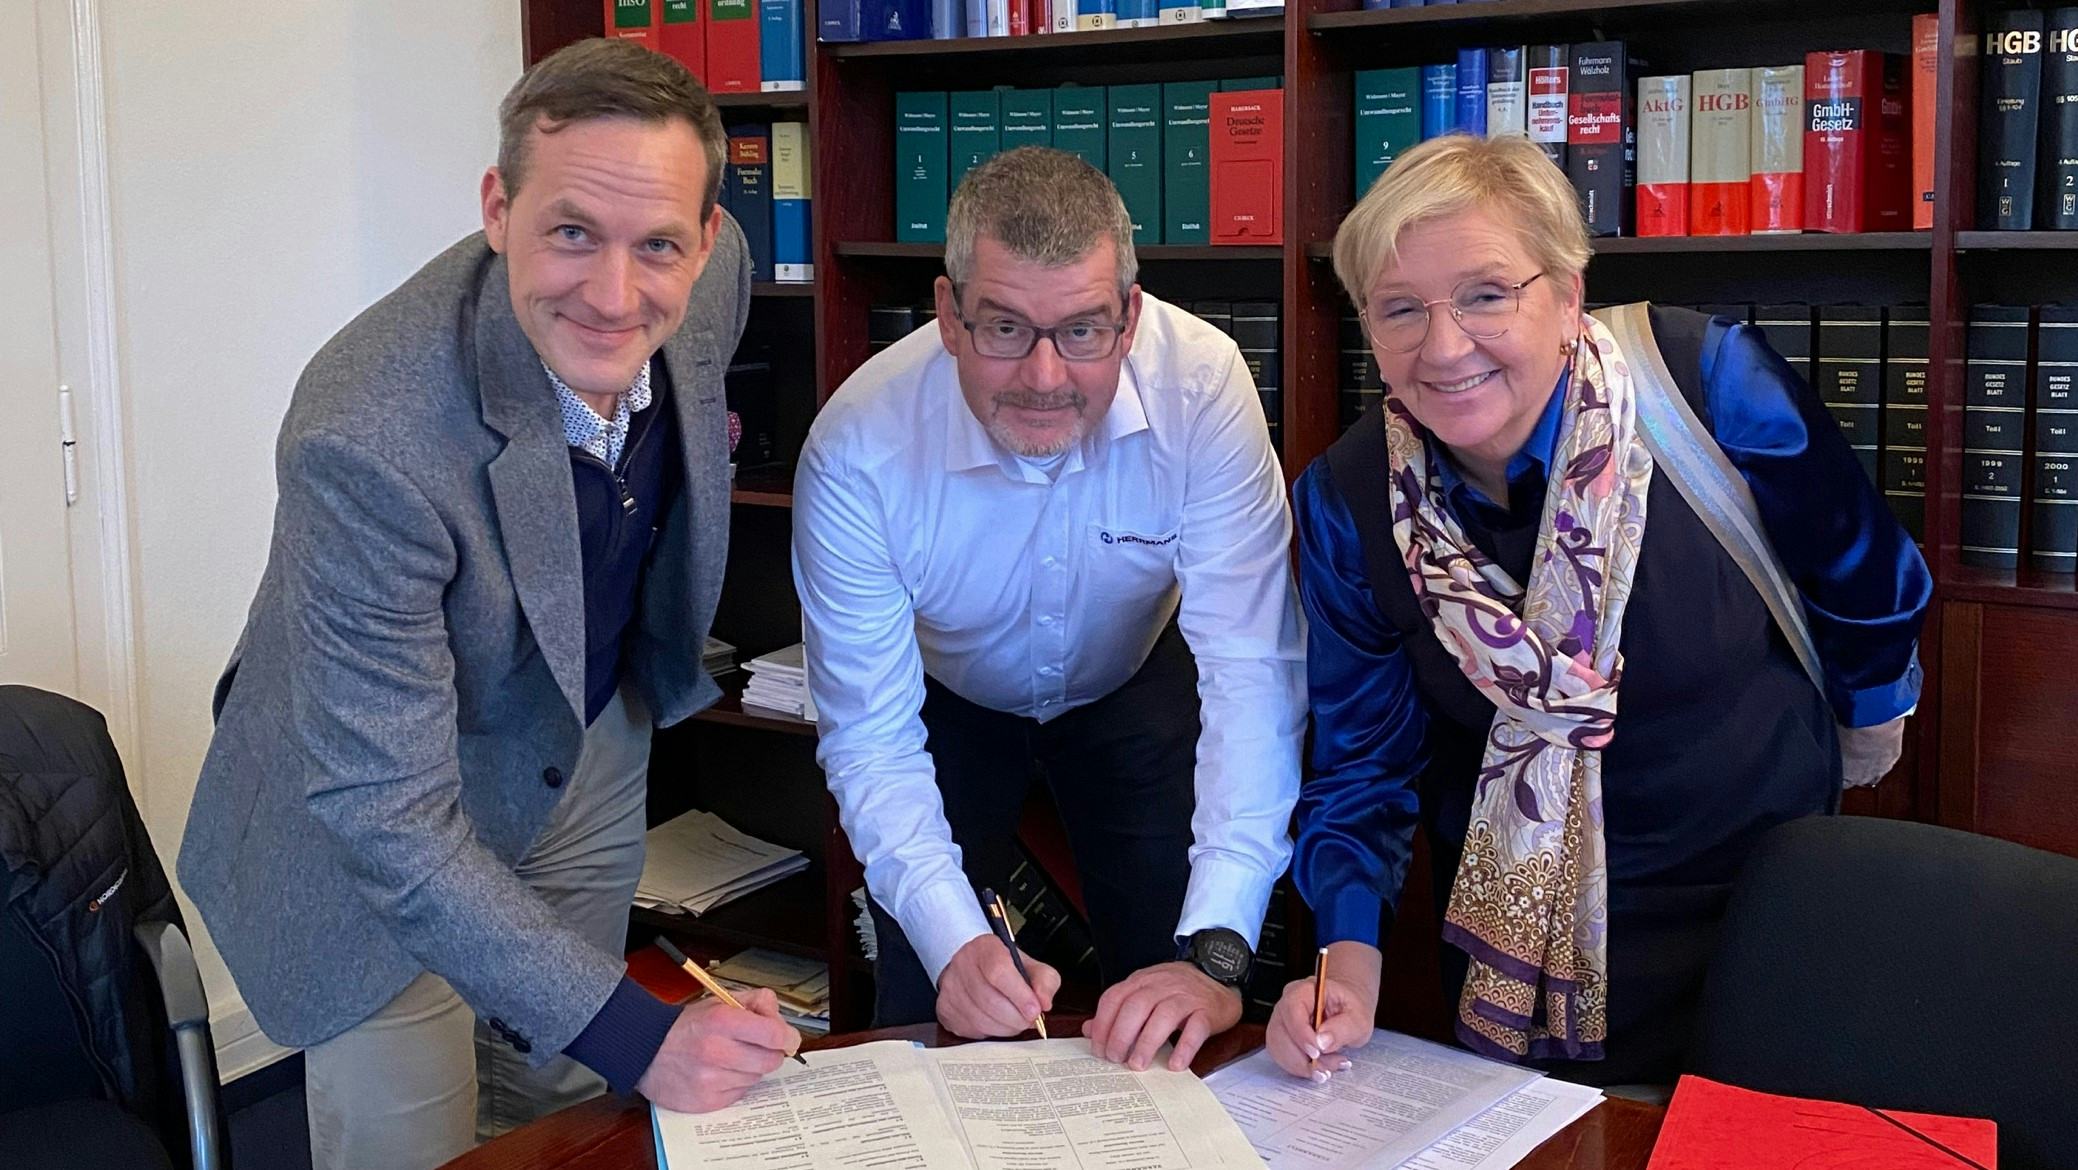 From left to right Dan Liljeqvist, CEO, Herrmans Bike Components, Thorsten Krüger, Global Customer Development Manager, Herrmans Bike Components and Sari Trosien, Accounting and Tax partner in Germany. – Photo Herrmans Bike Components